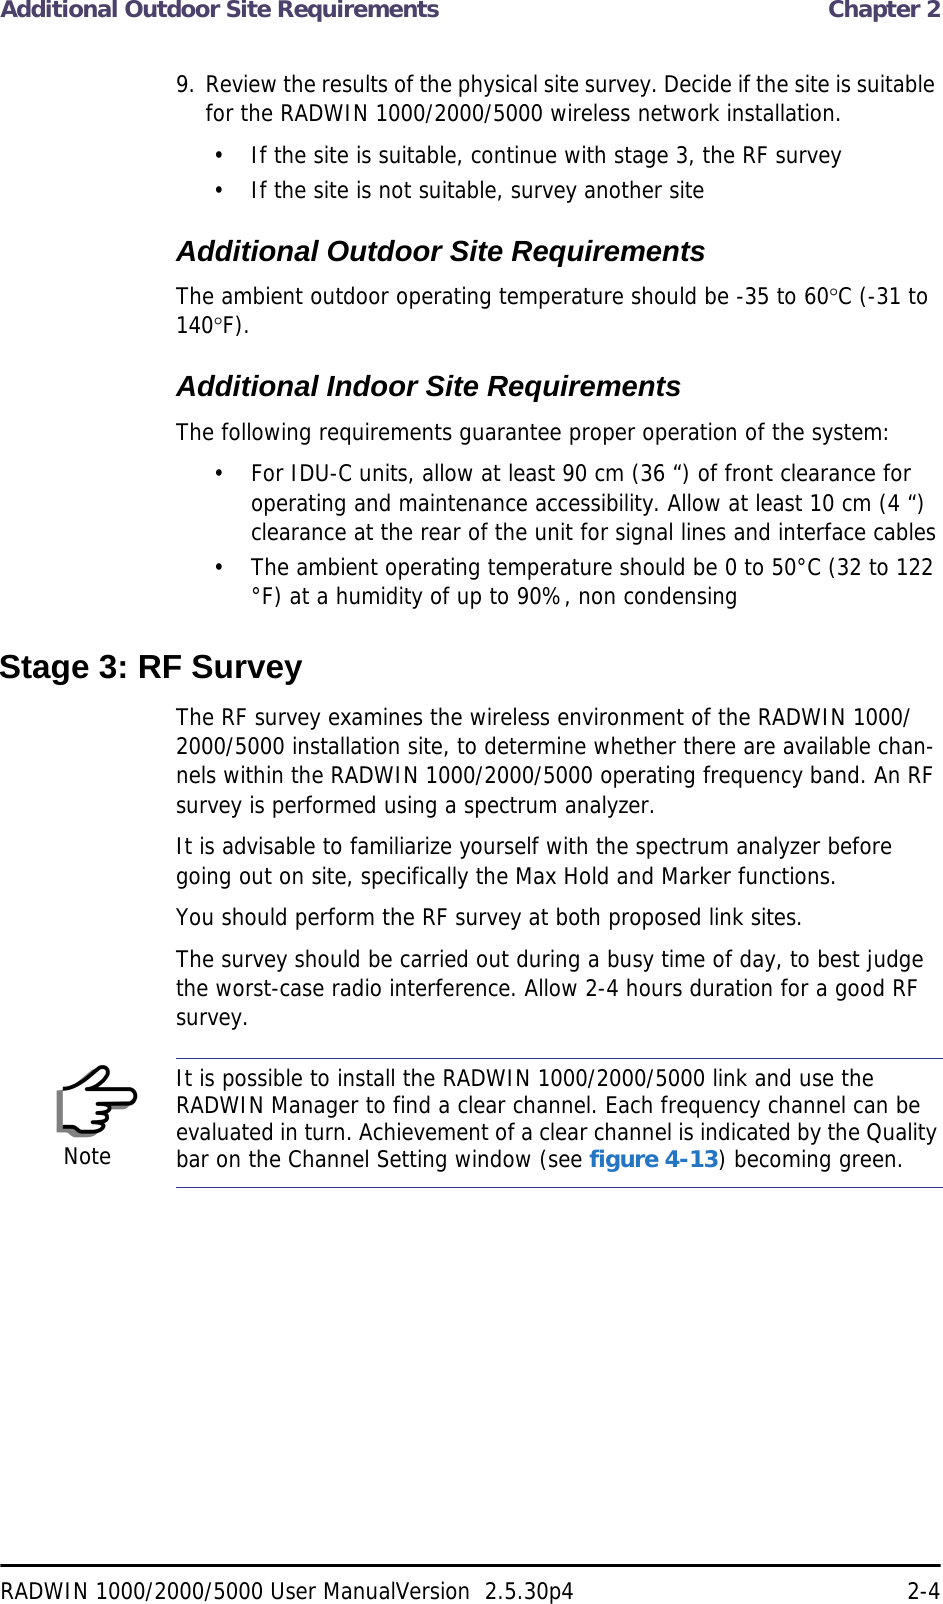 Additional Outdoor Site Requirements  Chapter 2RADWIN 1000/2000/5000 User ManualVersion  2.5.30p4 2-49. Review the results of the physical site survey. Decide if the site is suitable for the RADWIN 1000/2000/5000 wireless network installation.• If the site is suitable, continue with stage 3, the RF survey• If the site is not suitable, survey another siteAdditional Outdoor Site RequirementsThe ambient outdoor operating temperature should be -35 to 60C (-31 to 140F).Additional Indoor Site RequirementsThe following requirements guarantee proper operation of the system:• For IDU-C units, allow at least 90 cm (36 “) of front clearance for operating and maintenance accessibility. Allow at least 10 cm (4 “) clearance at the rear of the unit for signal lines and interface cables• The ambient operating temperature should be 0 to 50°C (32 to 122 °F) at a humidity of up to 90%, non condensingStage 3: RF SurveyThe RF survey examines the wireless environment of the RADWIN 1000/2000/5000 installation site, to determine whether there are available chan-nels within the RADWIN 1000/2000/5000 operating frequency band. An RF survey is performed using a spectrum analyzer.It is advisable to familiarize yourself with the spectrum analyzer before going out on site, specifically the Max Hold and Marker functions.You should perform the RF survey at both proposed link sites.The survey should be carried out during a busy time of day, to best judge the worst-case radio interference. Allow 2-4 hours duration for a good RF survey.NoteIt is possible to install the RADWIN 1000/2000/5000 link and use the RADWIN Manager to find a clear channel. Each frequency channel can be evaluated in turn. Achievement of a clear channel is indicated by the Quality bar on the Channel Setting window (see figure 4-13) becoming green.